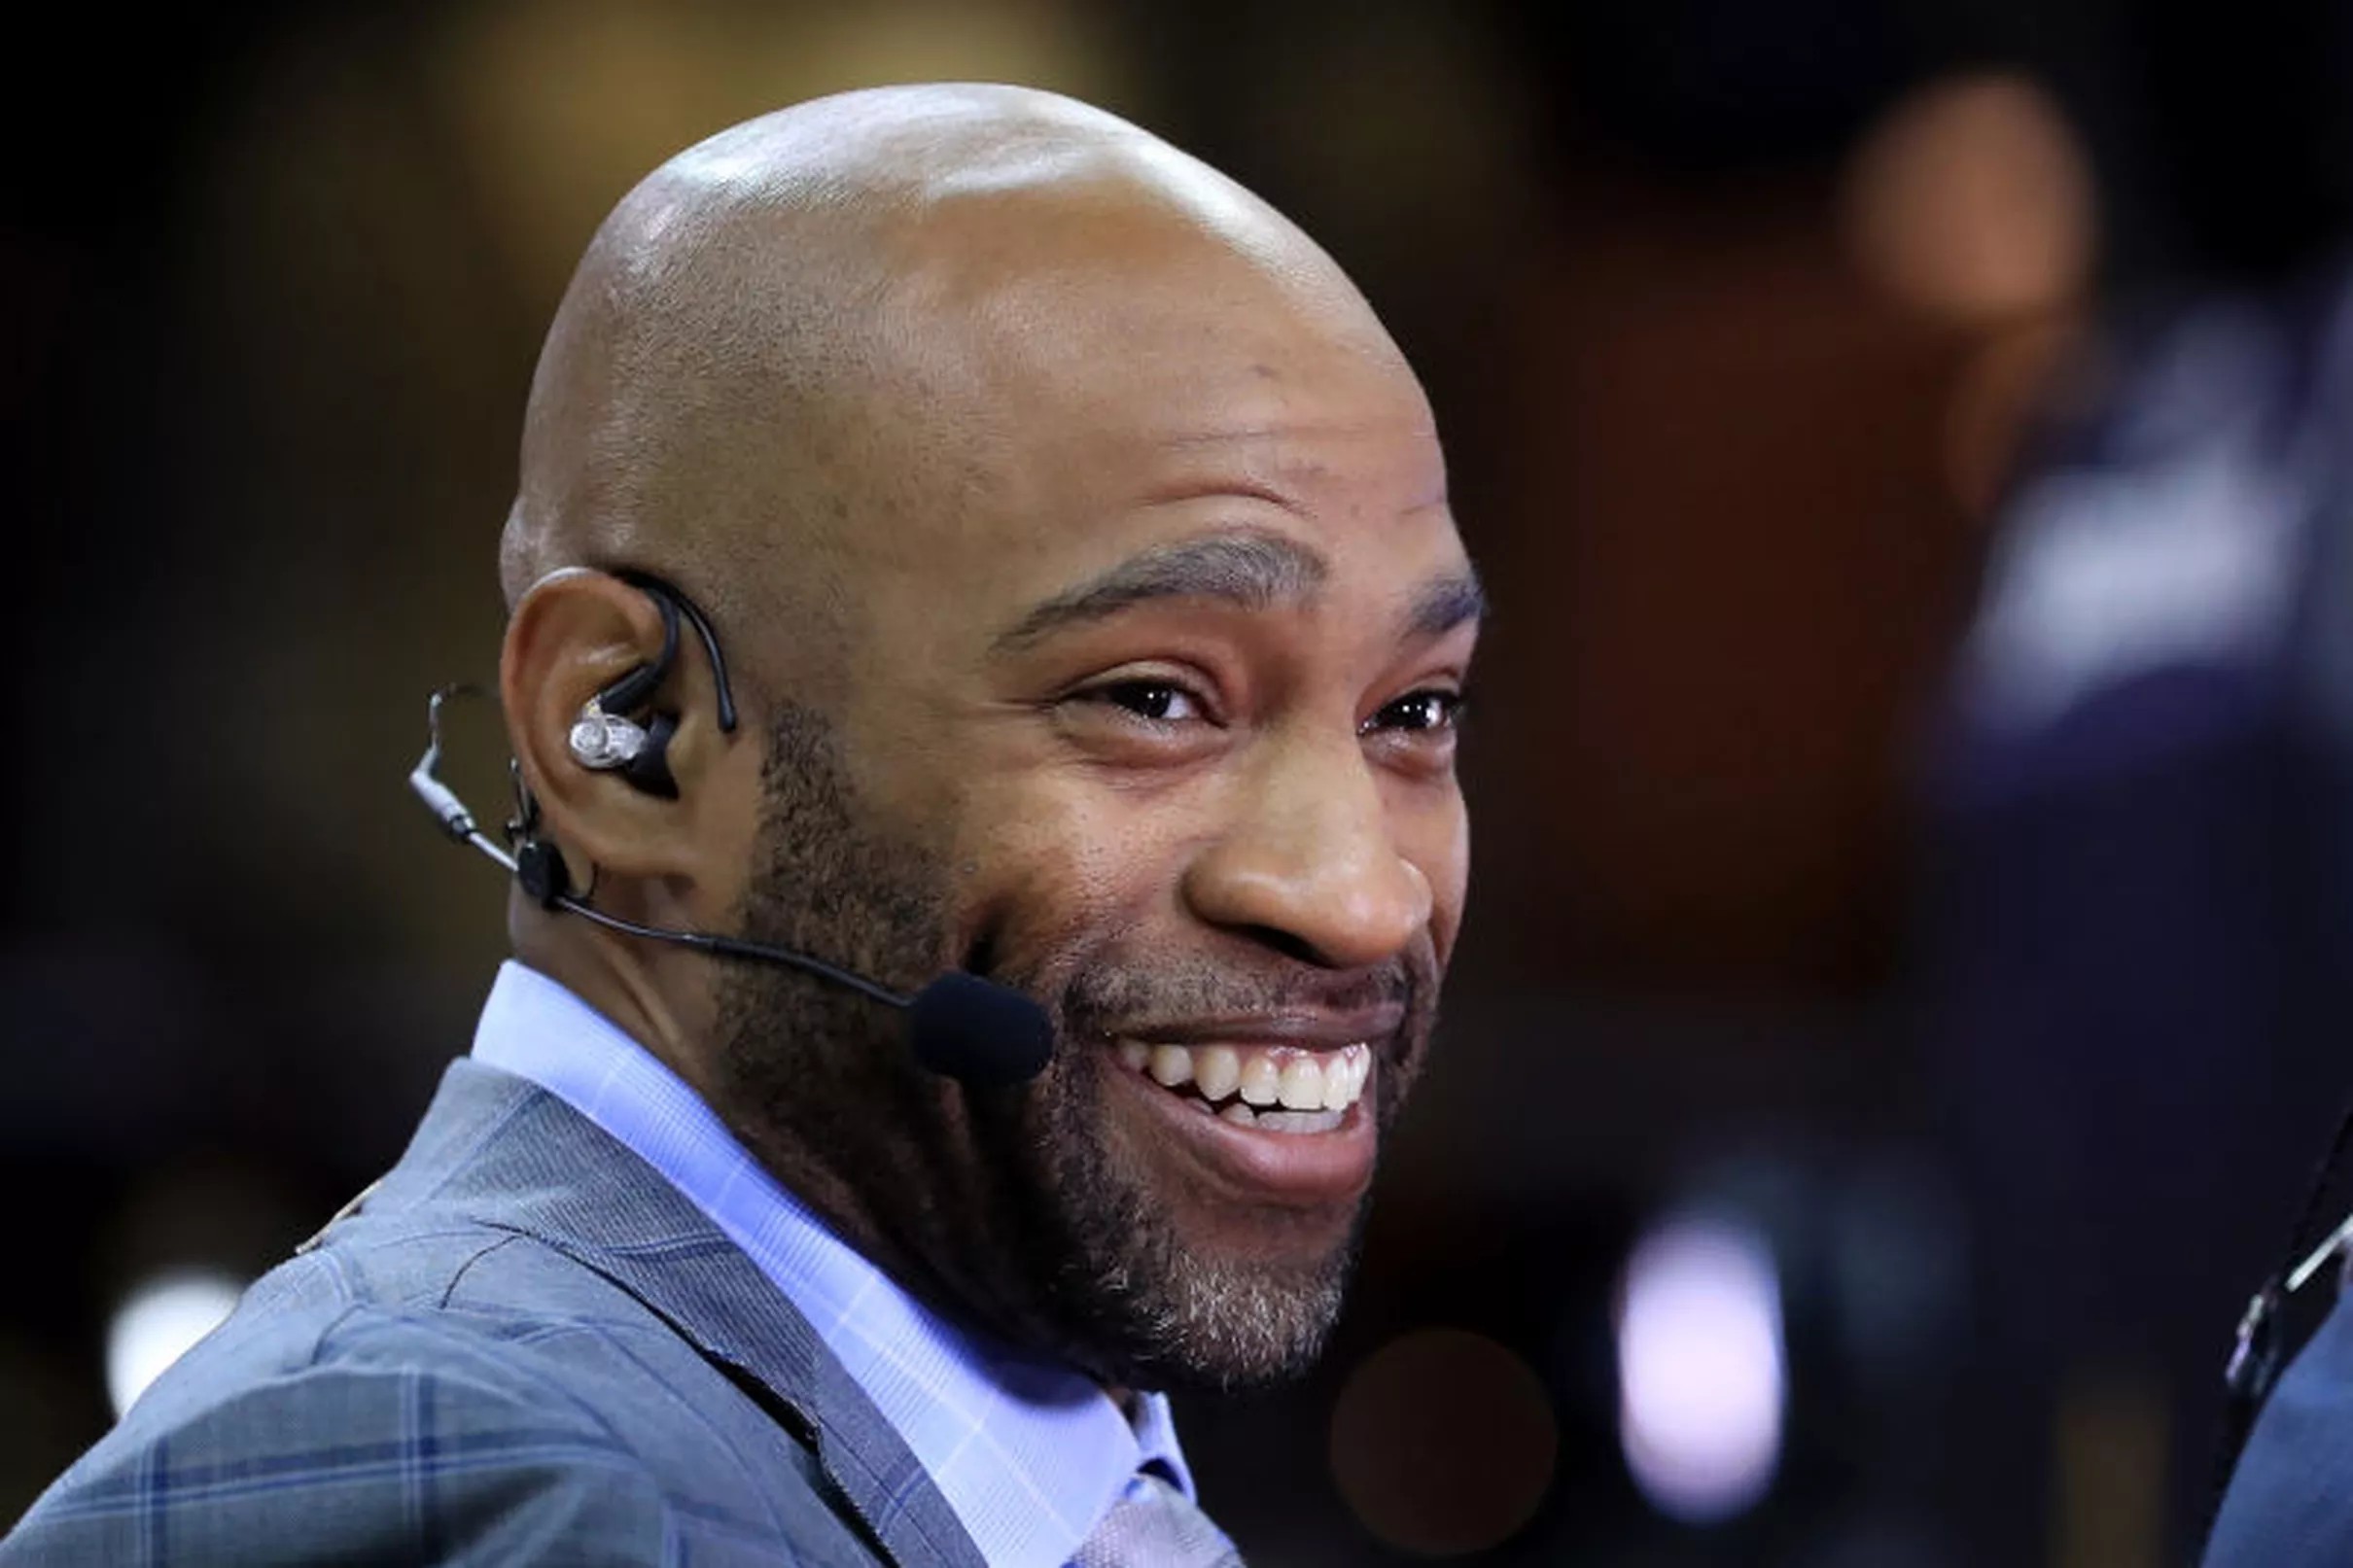 The beat goes on for Vince Carter in Atlanta